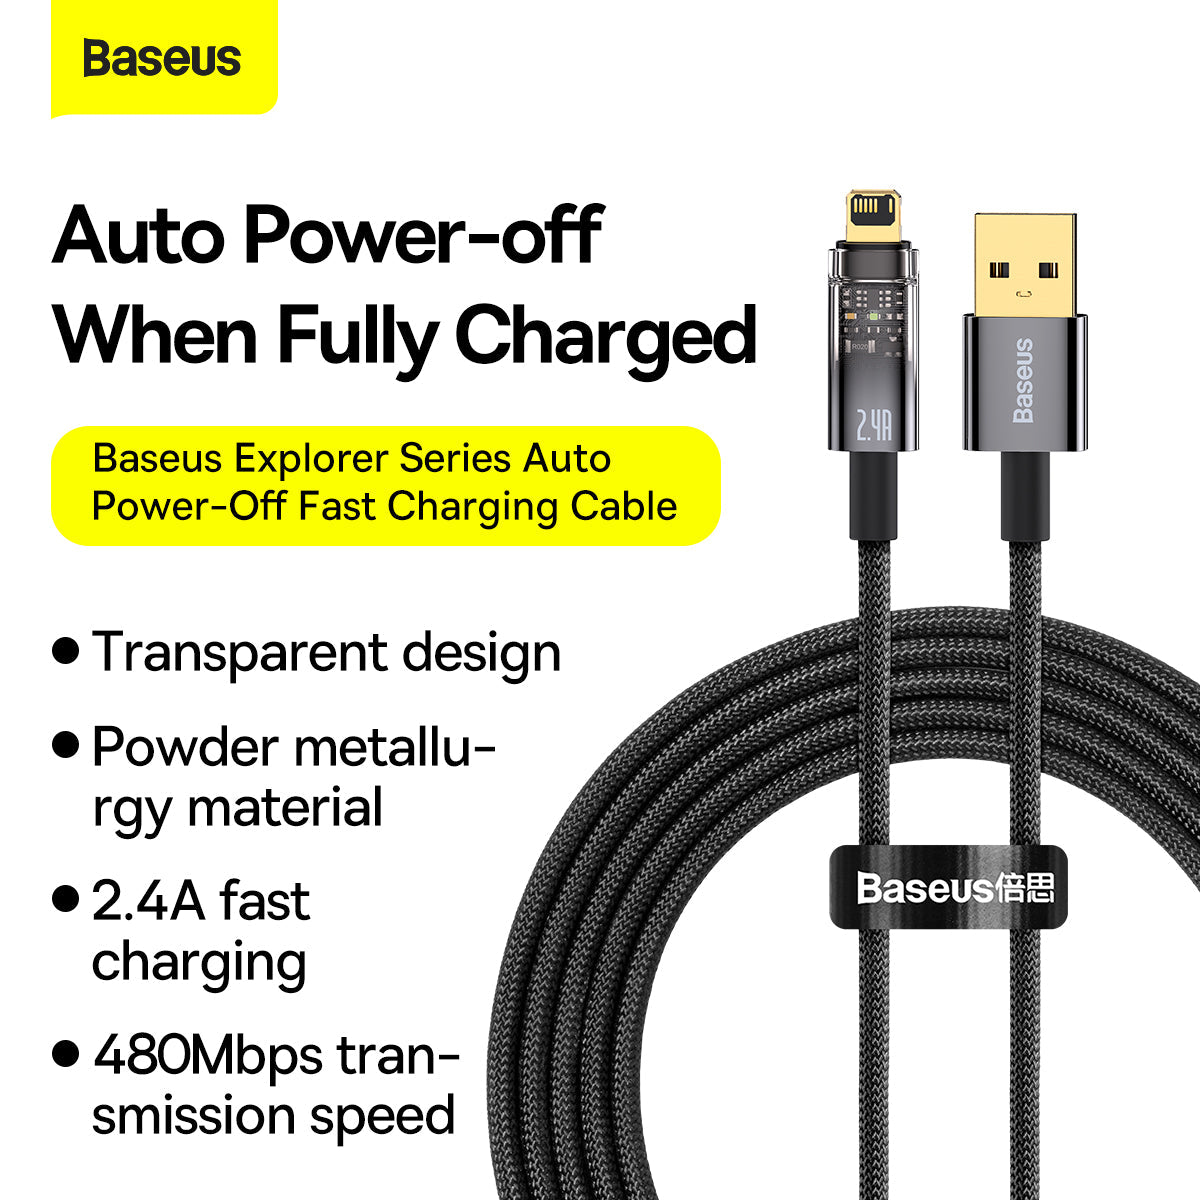 BASEUS EXPLORER SERIES AUTO POWER-OFF FAST CHARGING DATA CABLE USB TO IPH (2.4A)(2M), Auto Disconnect Cable, iPhone Cable, Lighting Cable, iPhone Charging Cable